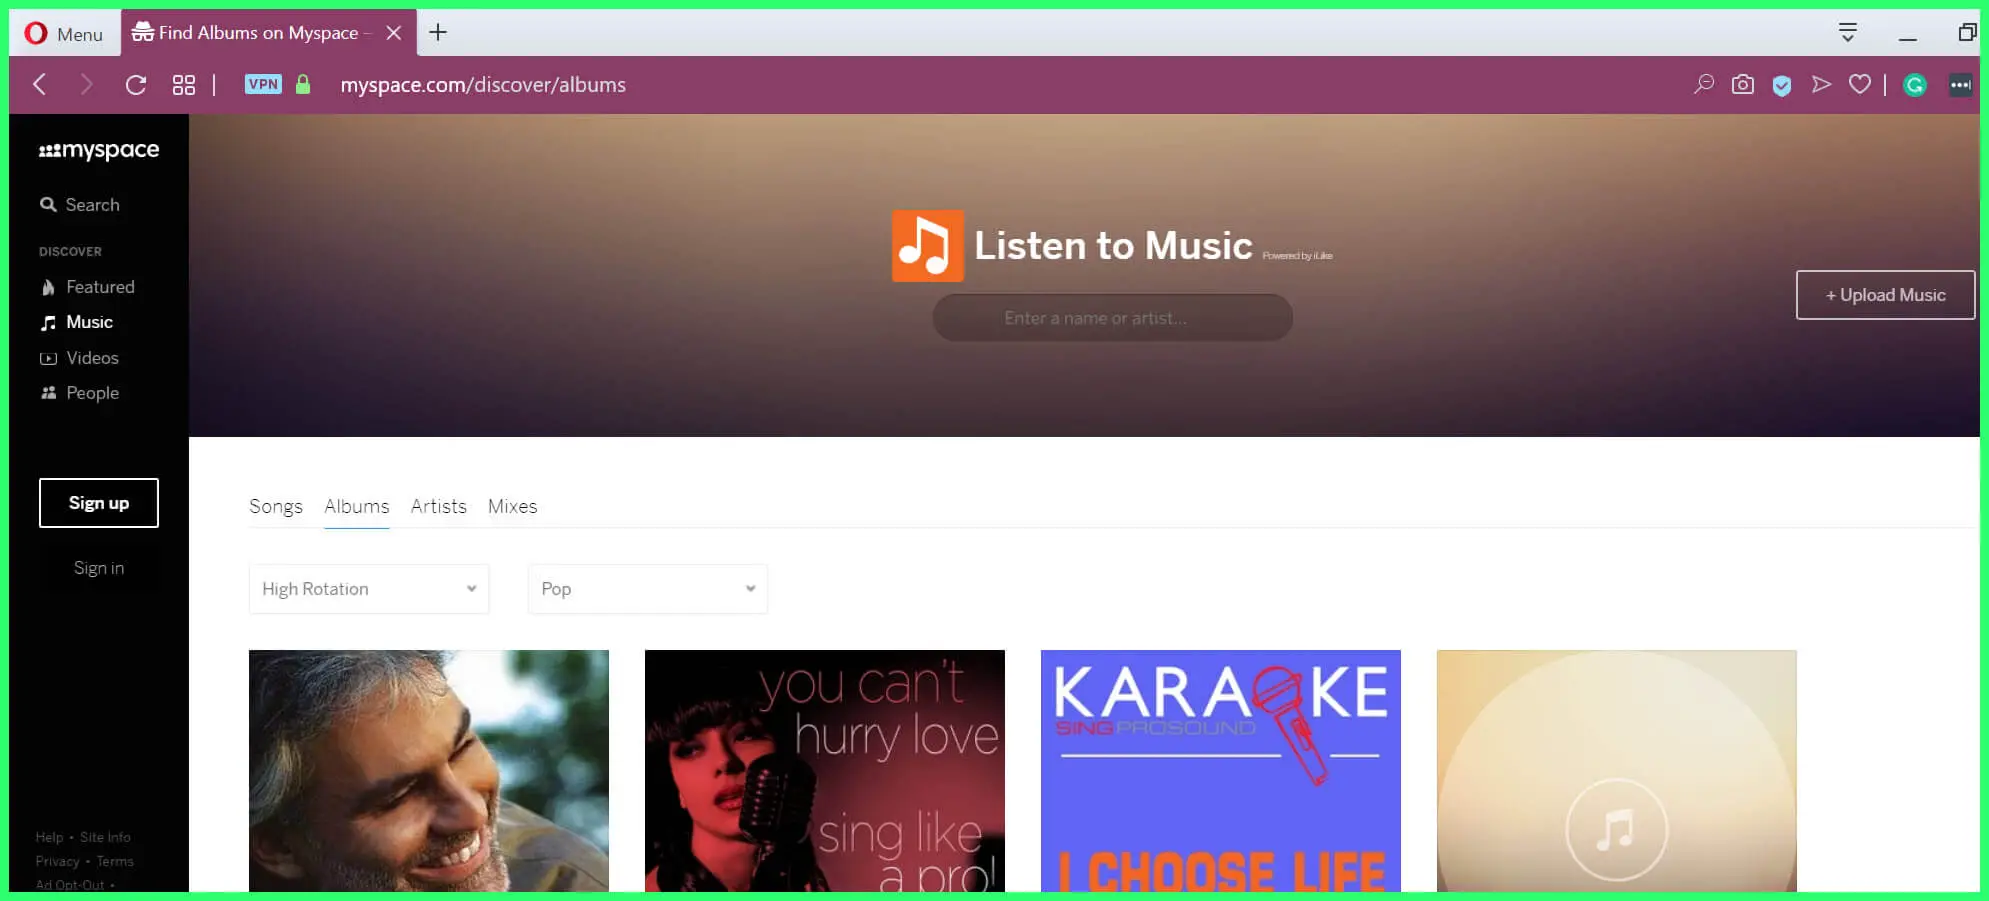 13 Of The Best Alternatives of Spotify For Music Streaming